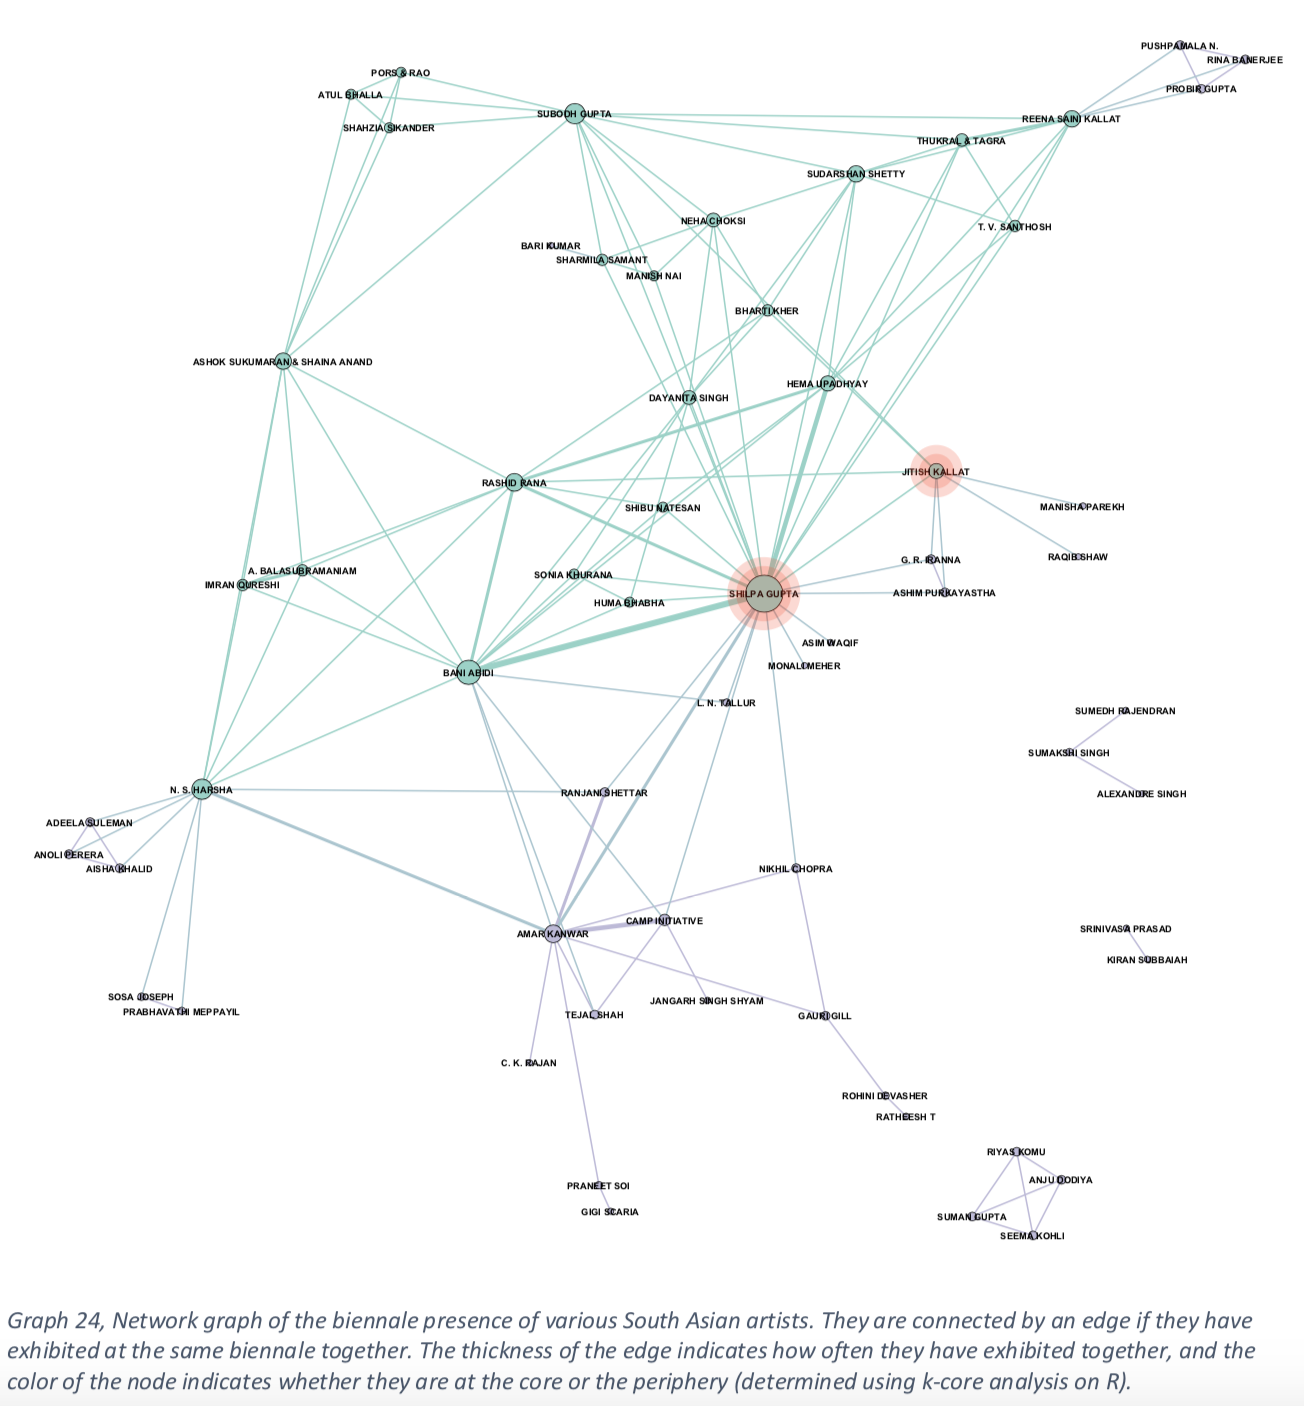 graph of the biennale presence of various South Asian artists, further description in text